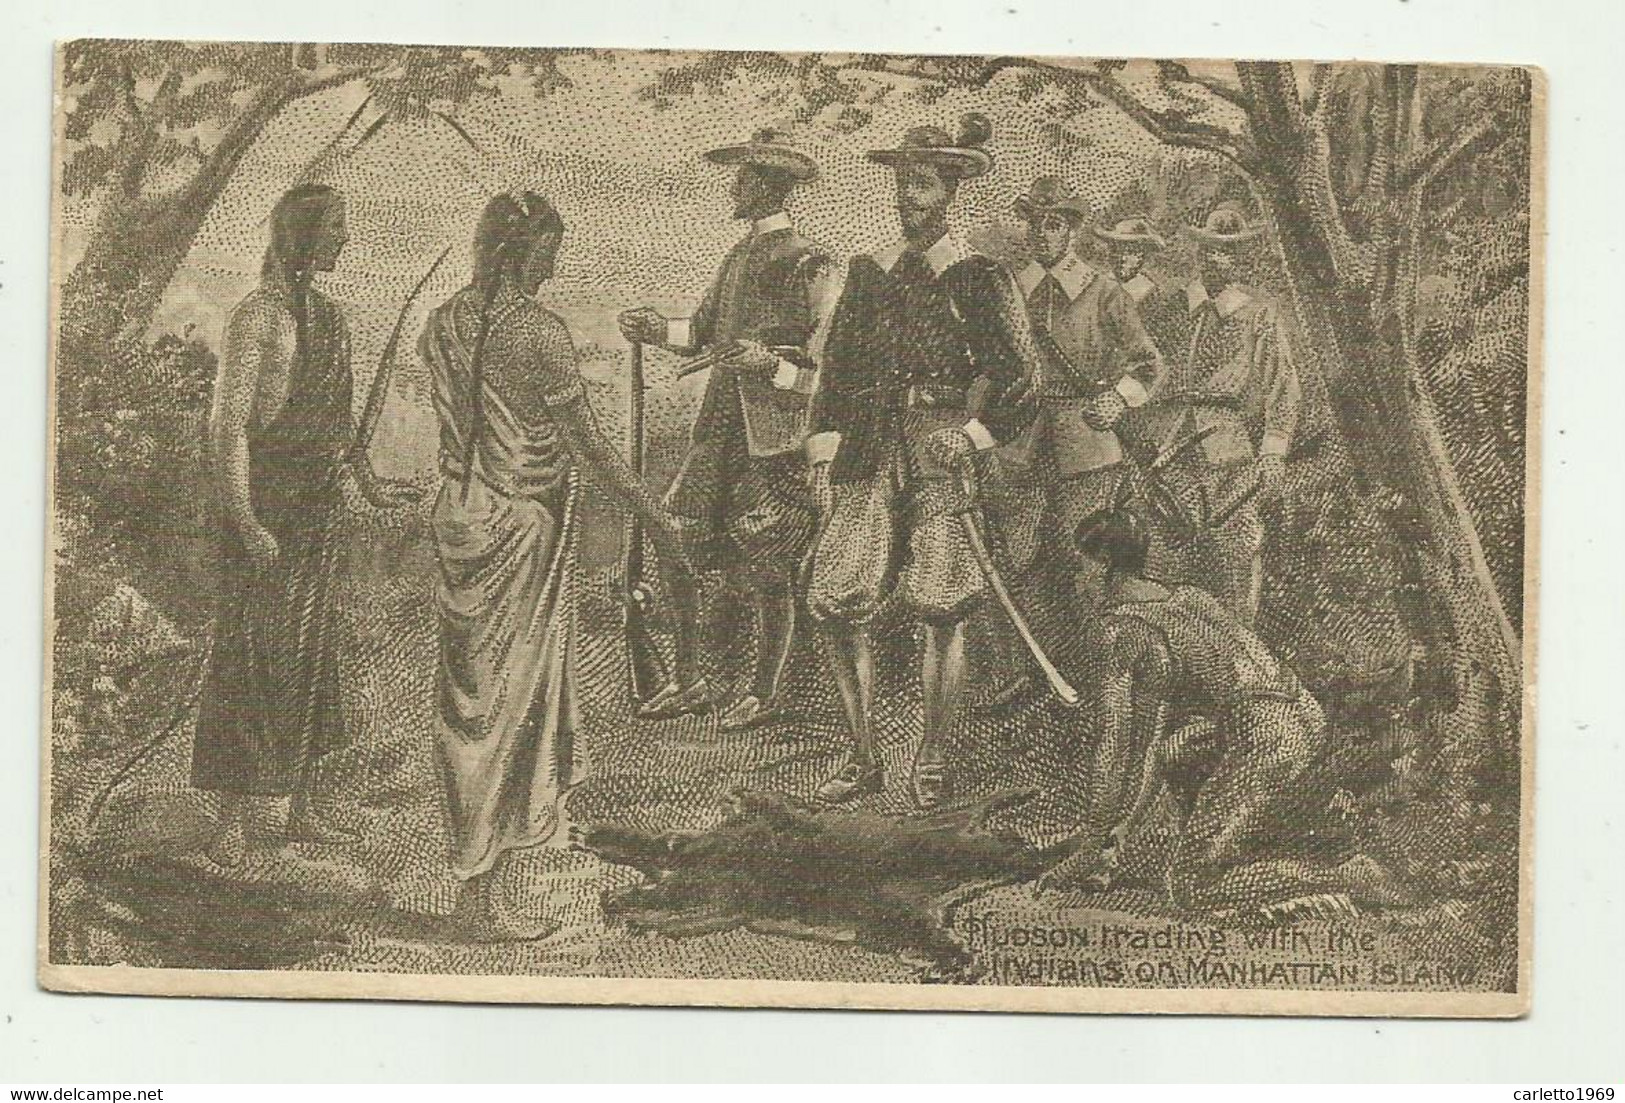 HUDSON TRADING WITH THE INDIANS ON MANHATTAN ISLANDS - NV FP - America